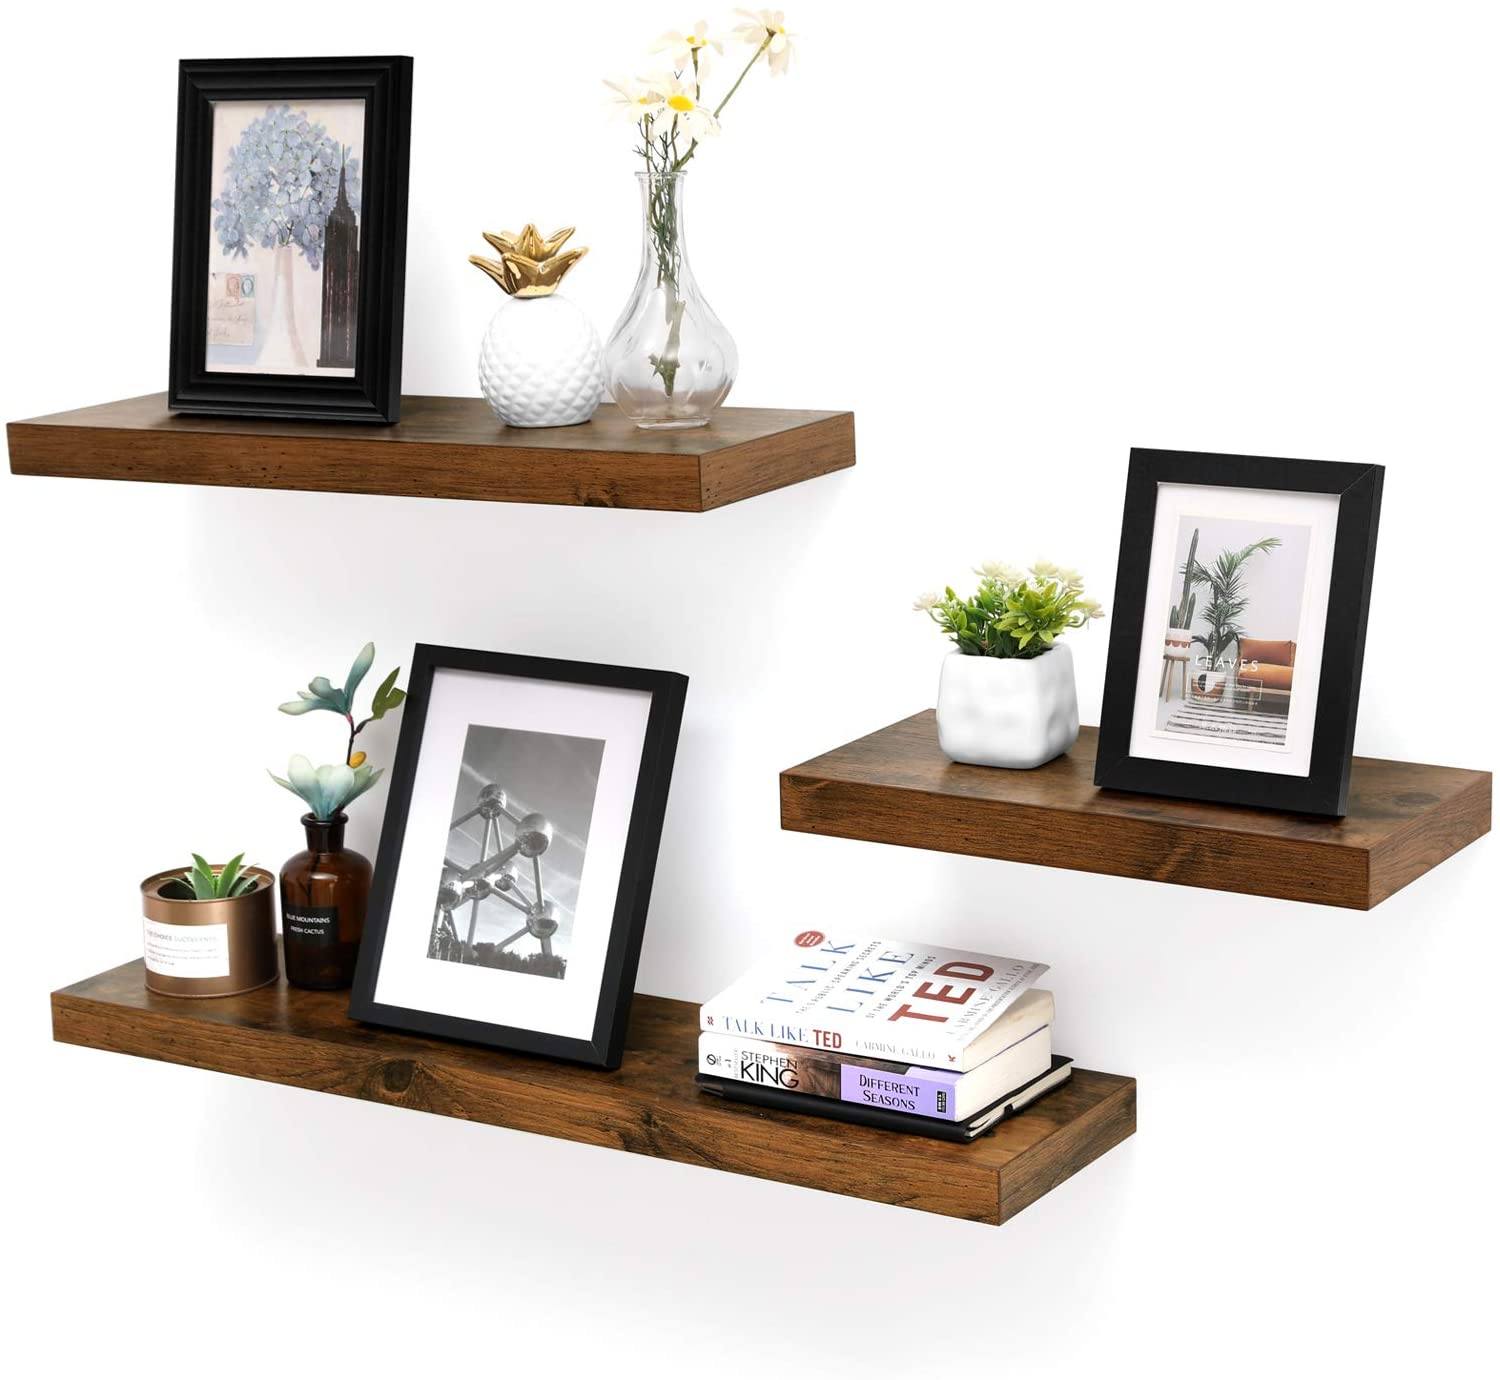 Floating Shelf, Wall Shelf for Photos, Decorations, in Living Room, Kitchen, Hallway, Bedroom, Bathroom, Rustic Brown LWS24BX RAW58.dk 